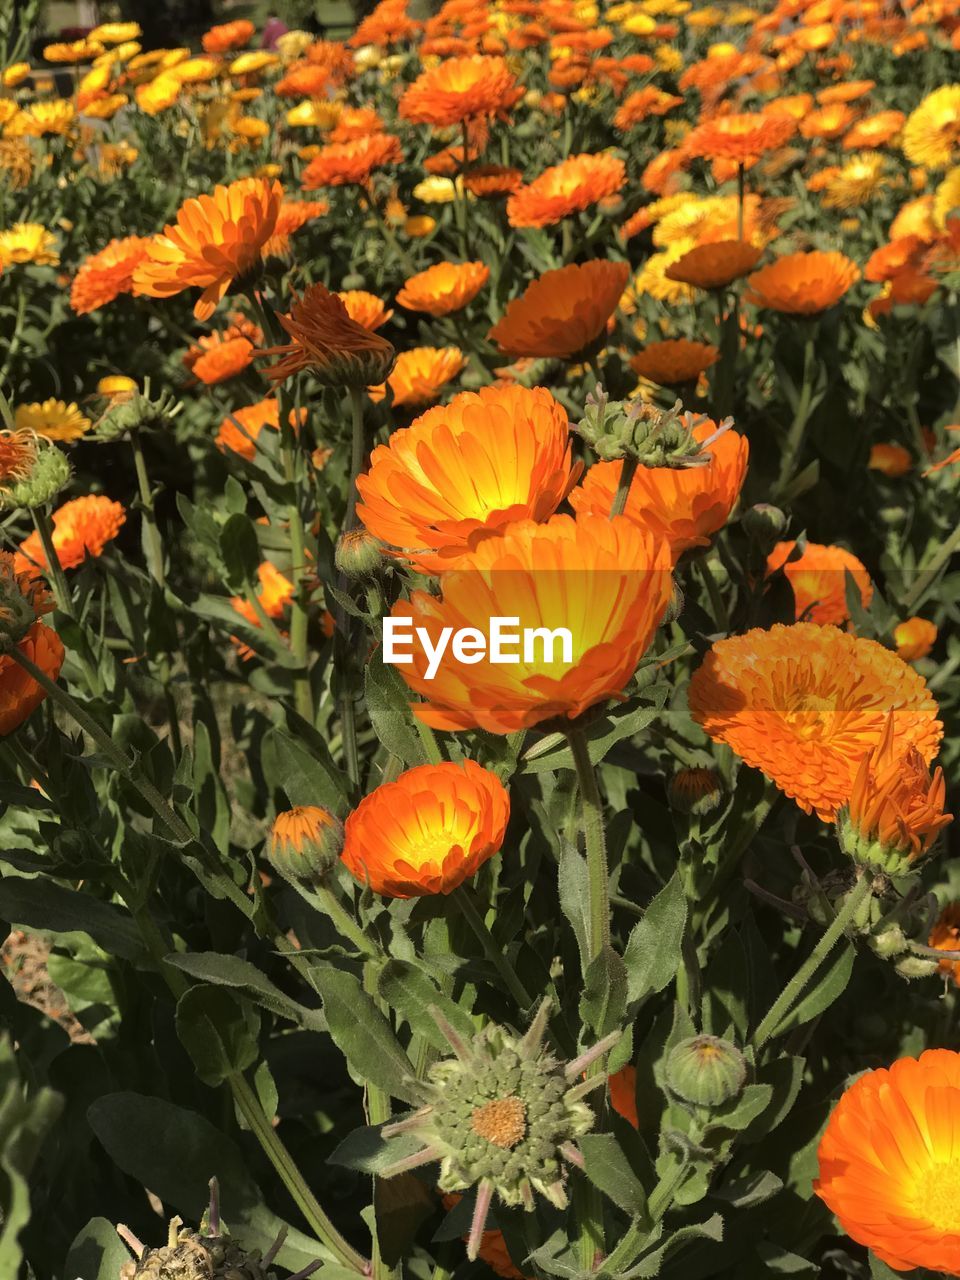 plant, orange color, growth, beauty in nature, flower, freshness, flowering plant, nature, plant part, leaf, fragility, yellow, petal, flower head, no people, close-up, day, inflorescence, autumn, wildflower, high angle view, outdoors, botany, green, orange, food, land, field, sunlight